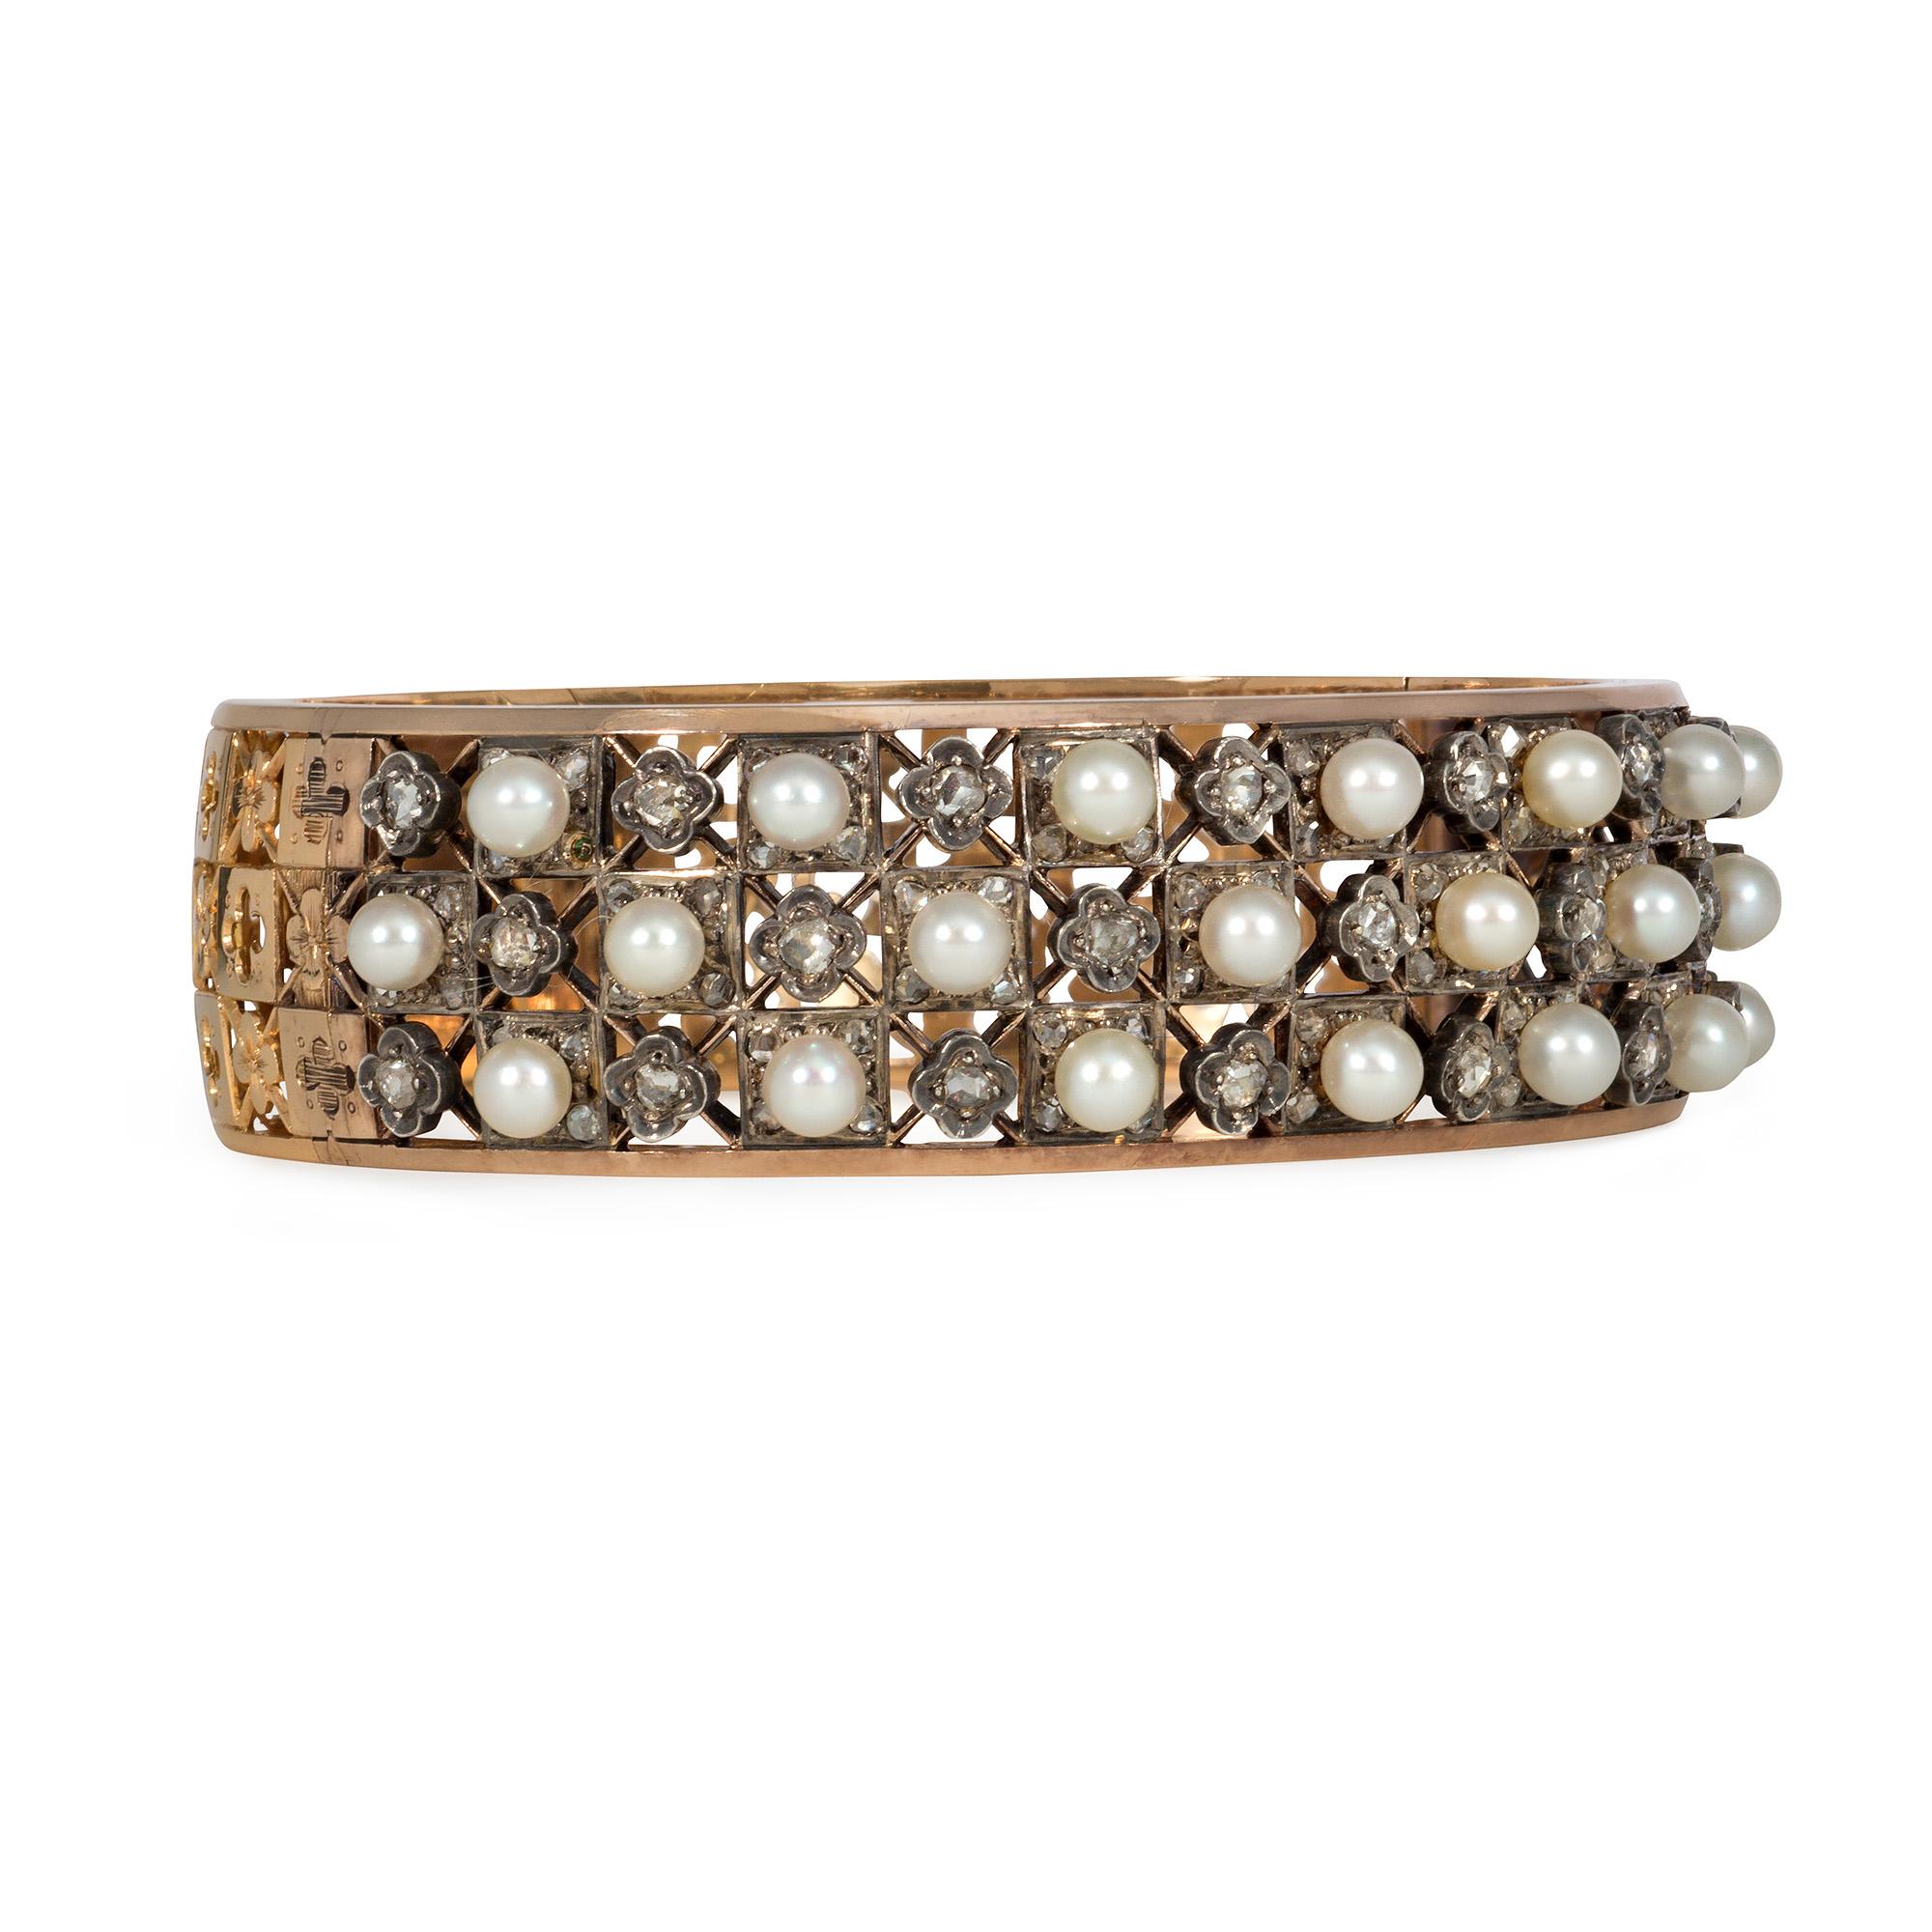 An antique gold, pearl, and diamond cuff bracelet of openwork, lattice design, the front featuring alternating pearls and rose diamonds, with each diamond in a quatrefoil setting, and the back featuring an open lace pattern of alternating quatrefoil